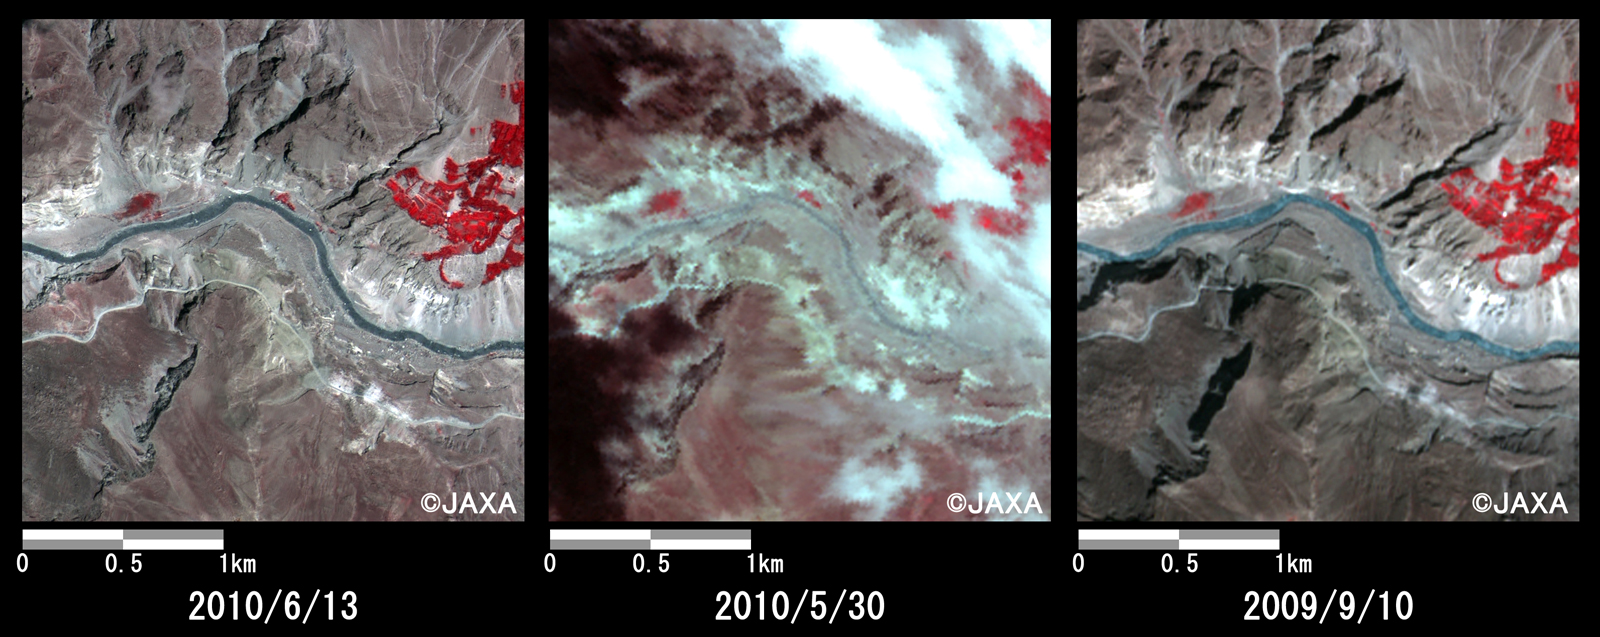 Fig. 5: Enlarged image of down reaches of the dammed lake. (2.5 km squares, left: June 13, 2010; middle: May 30, 2010; right: Sep. 10, 2009).